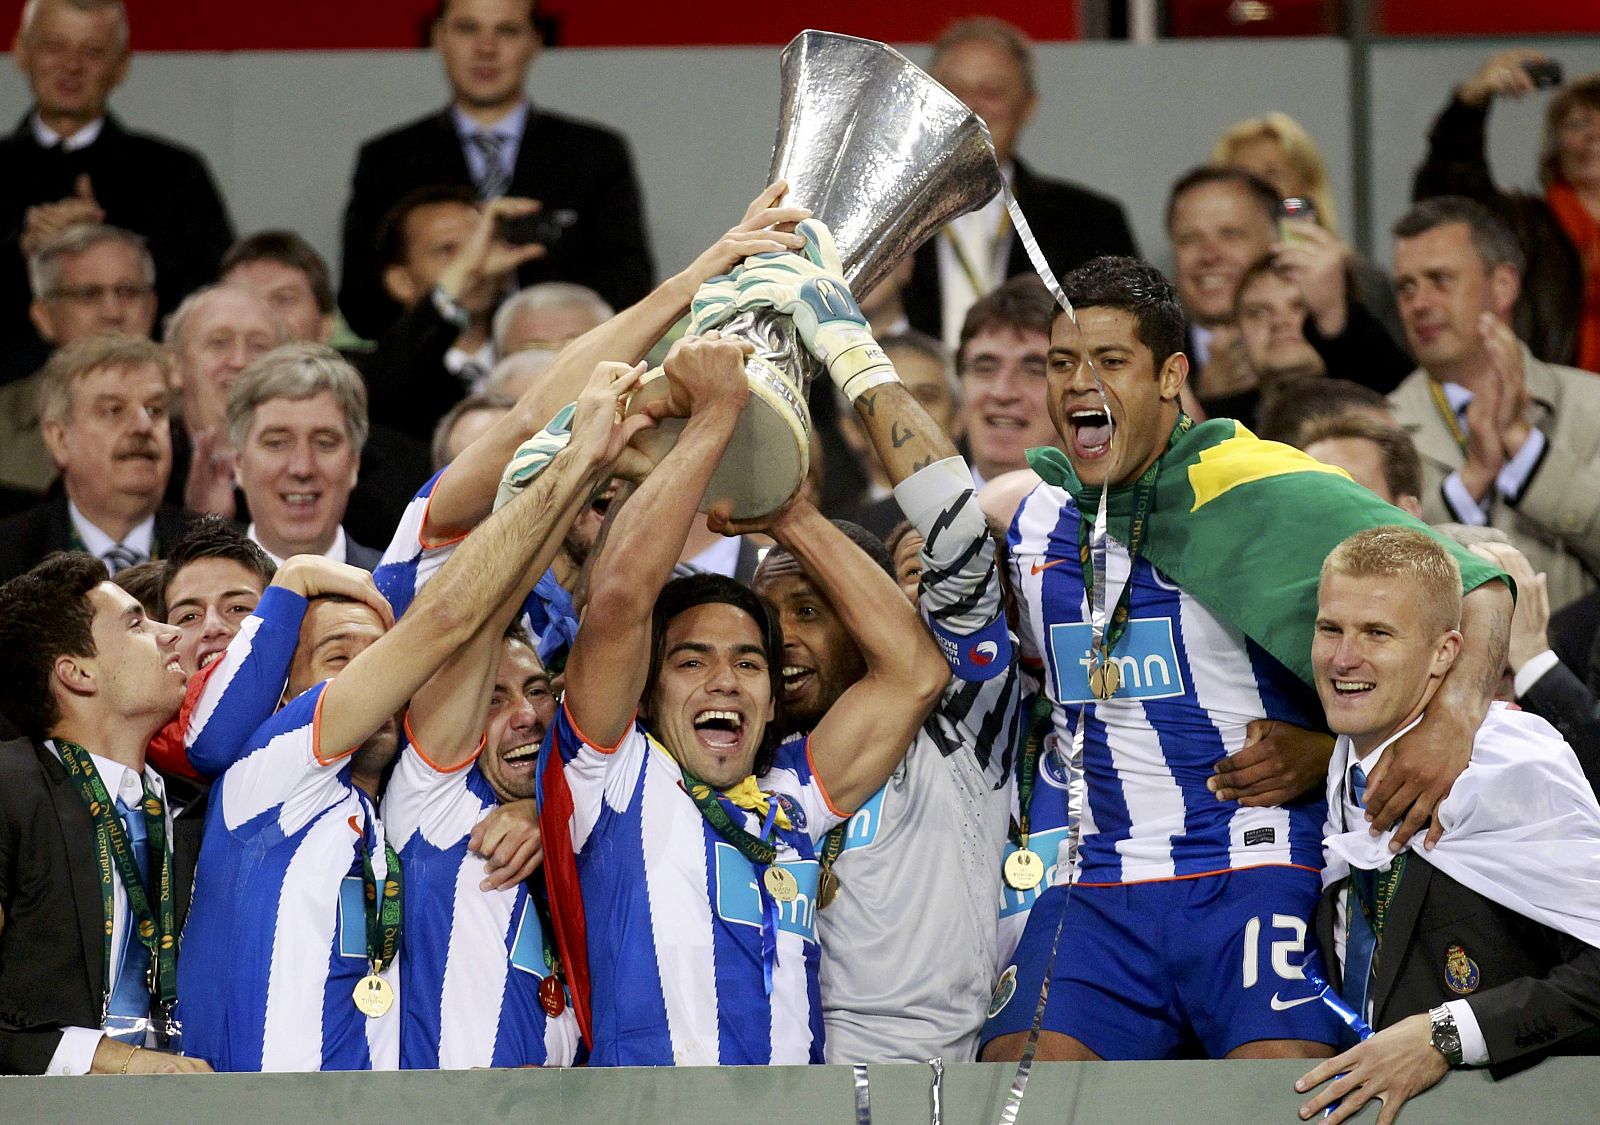 Porto players hold up the trophy as they celebrate their Europa League final soccer match victory against Braga in Dublin